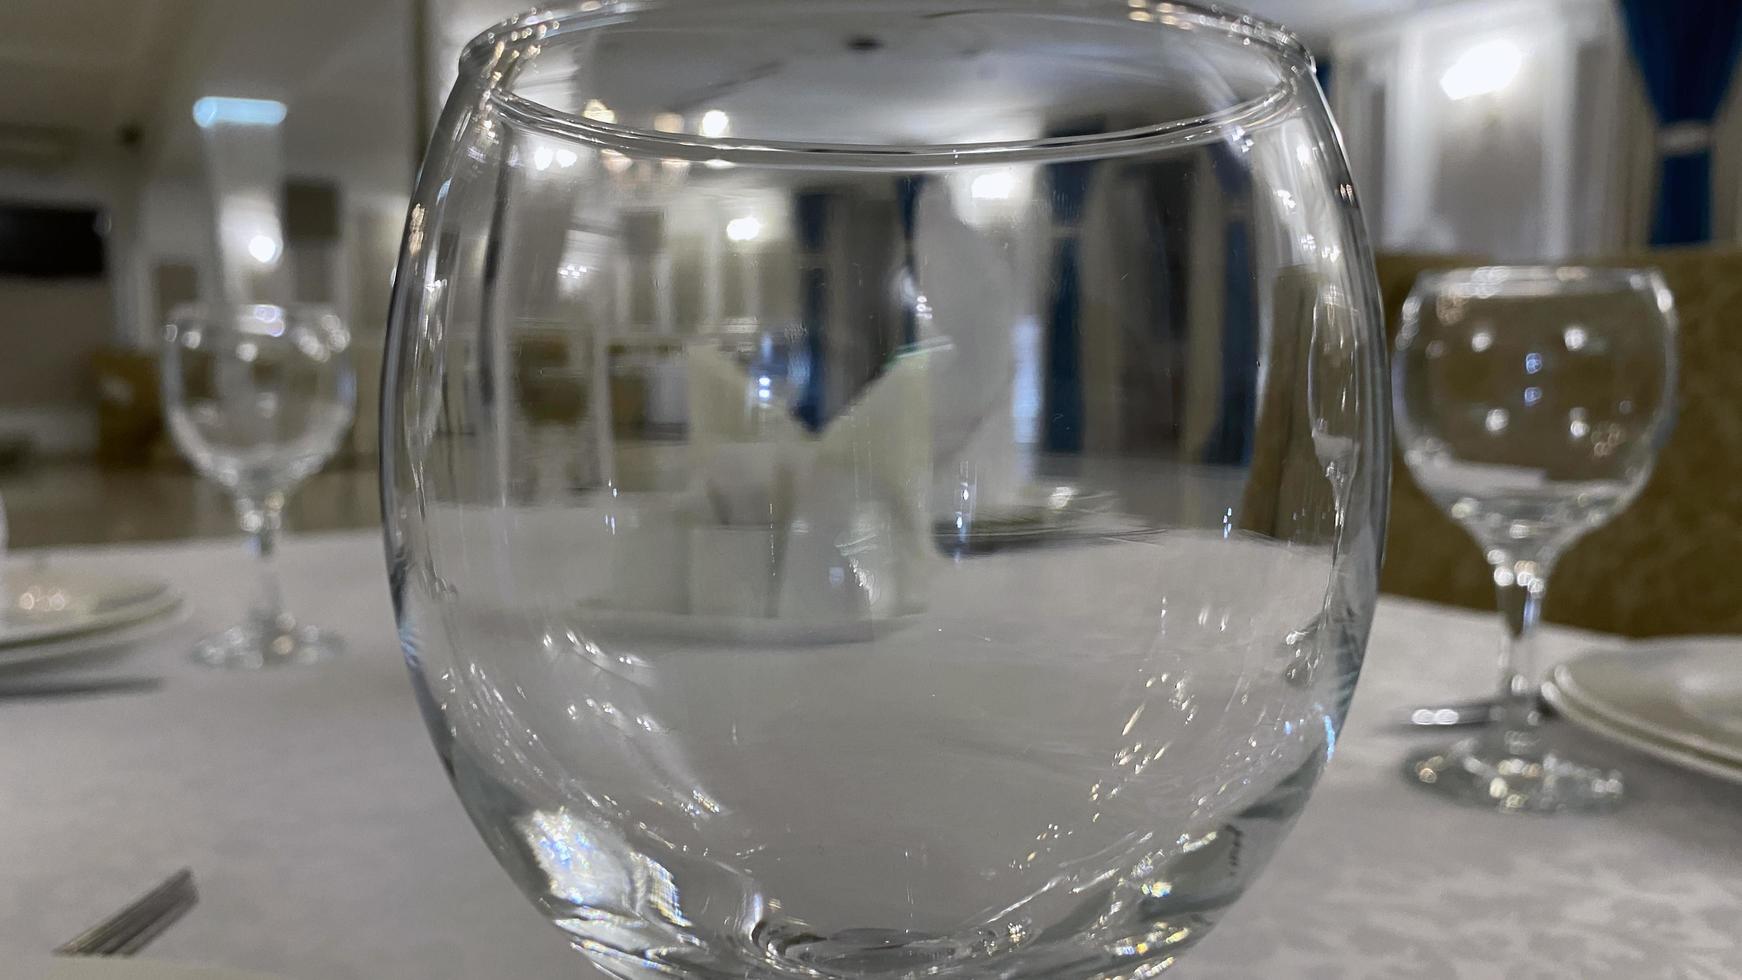 View of the room through a glass glass on the table photo